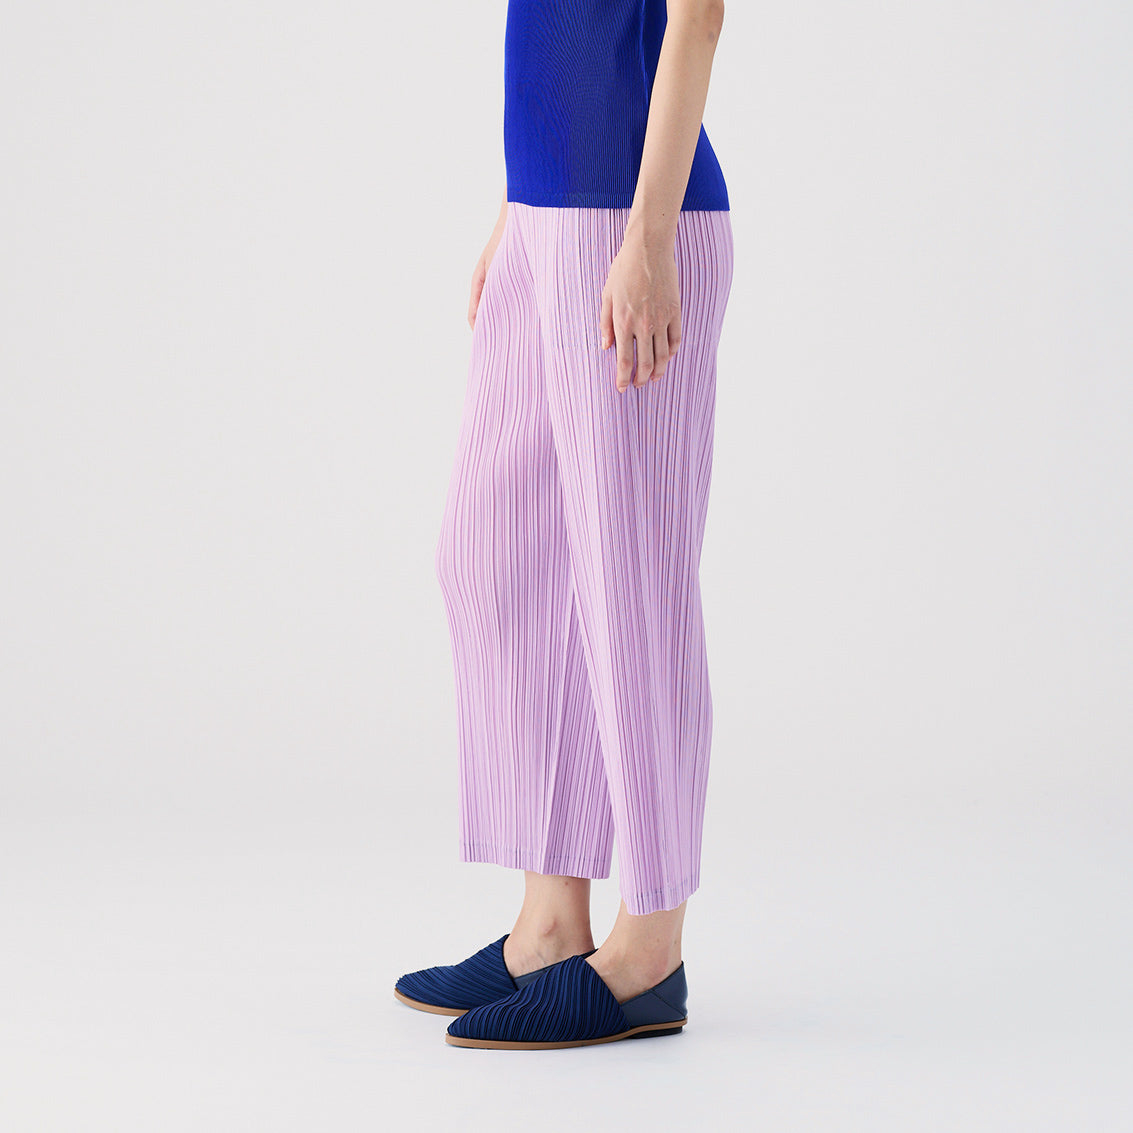 Side half body photo of model wearing the Thicker Bottoms Pants - Pink Purple.